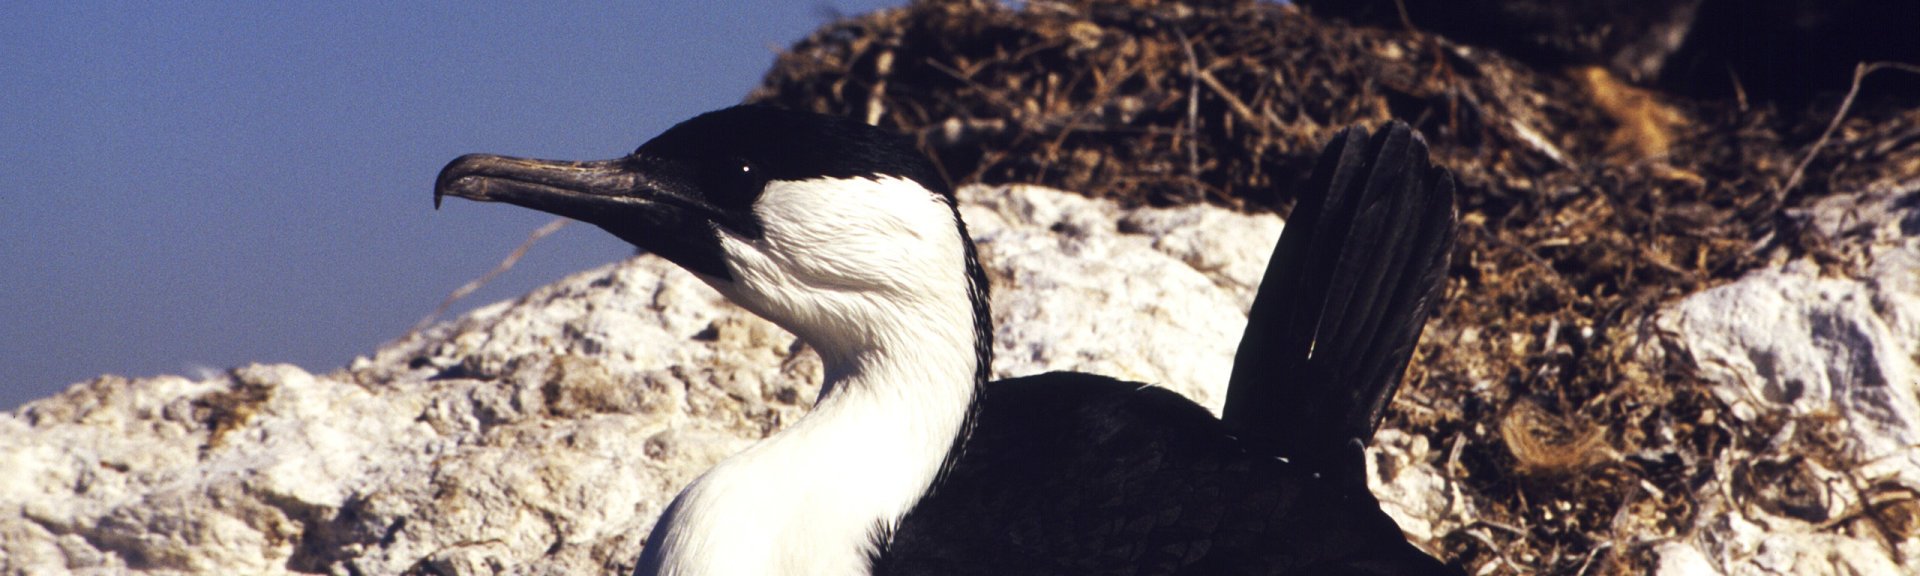 Black-faced cormorant, nesting. Photo from Brian Furby Collection